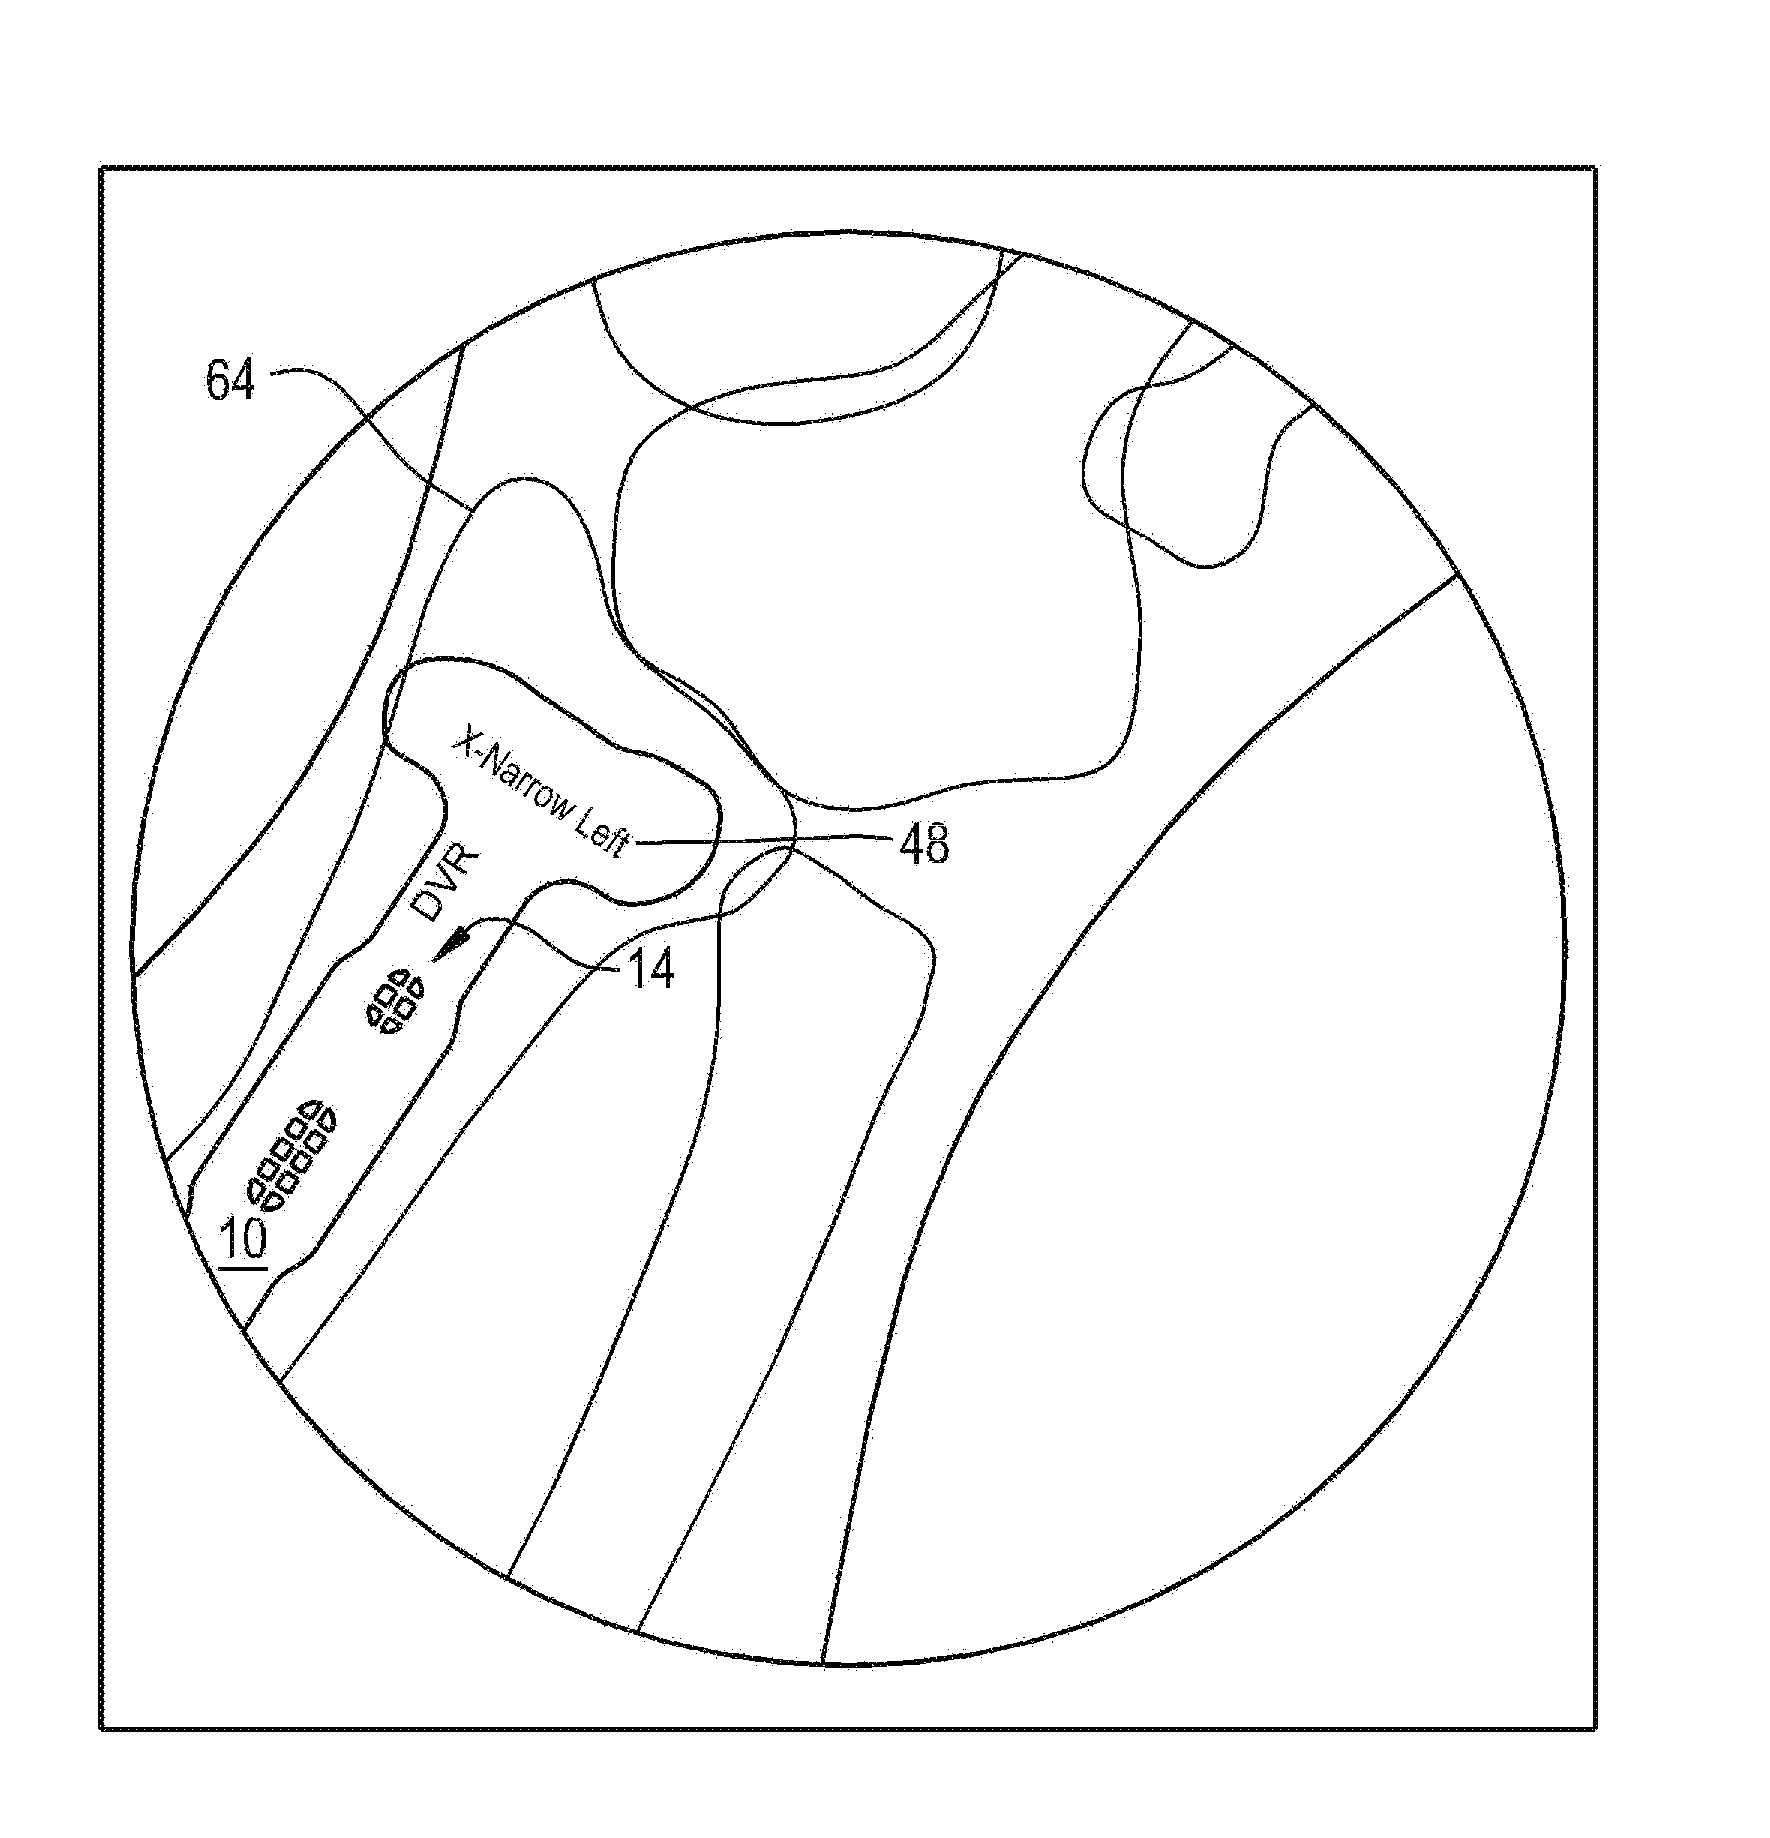 Orthopaedic implant template and method of making